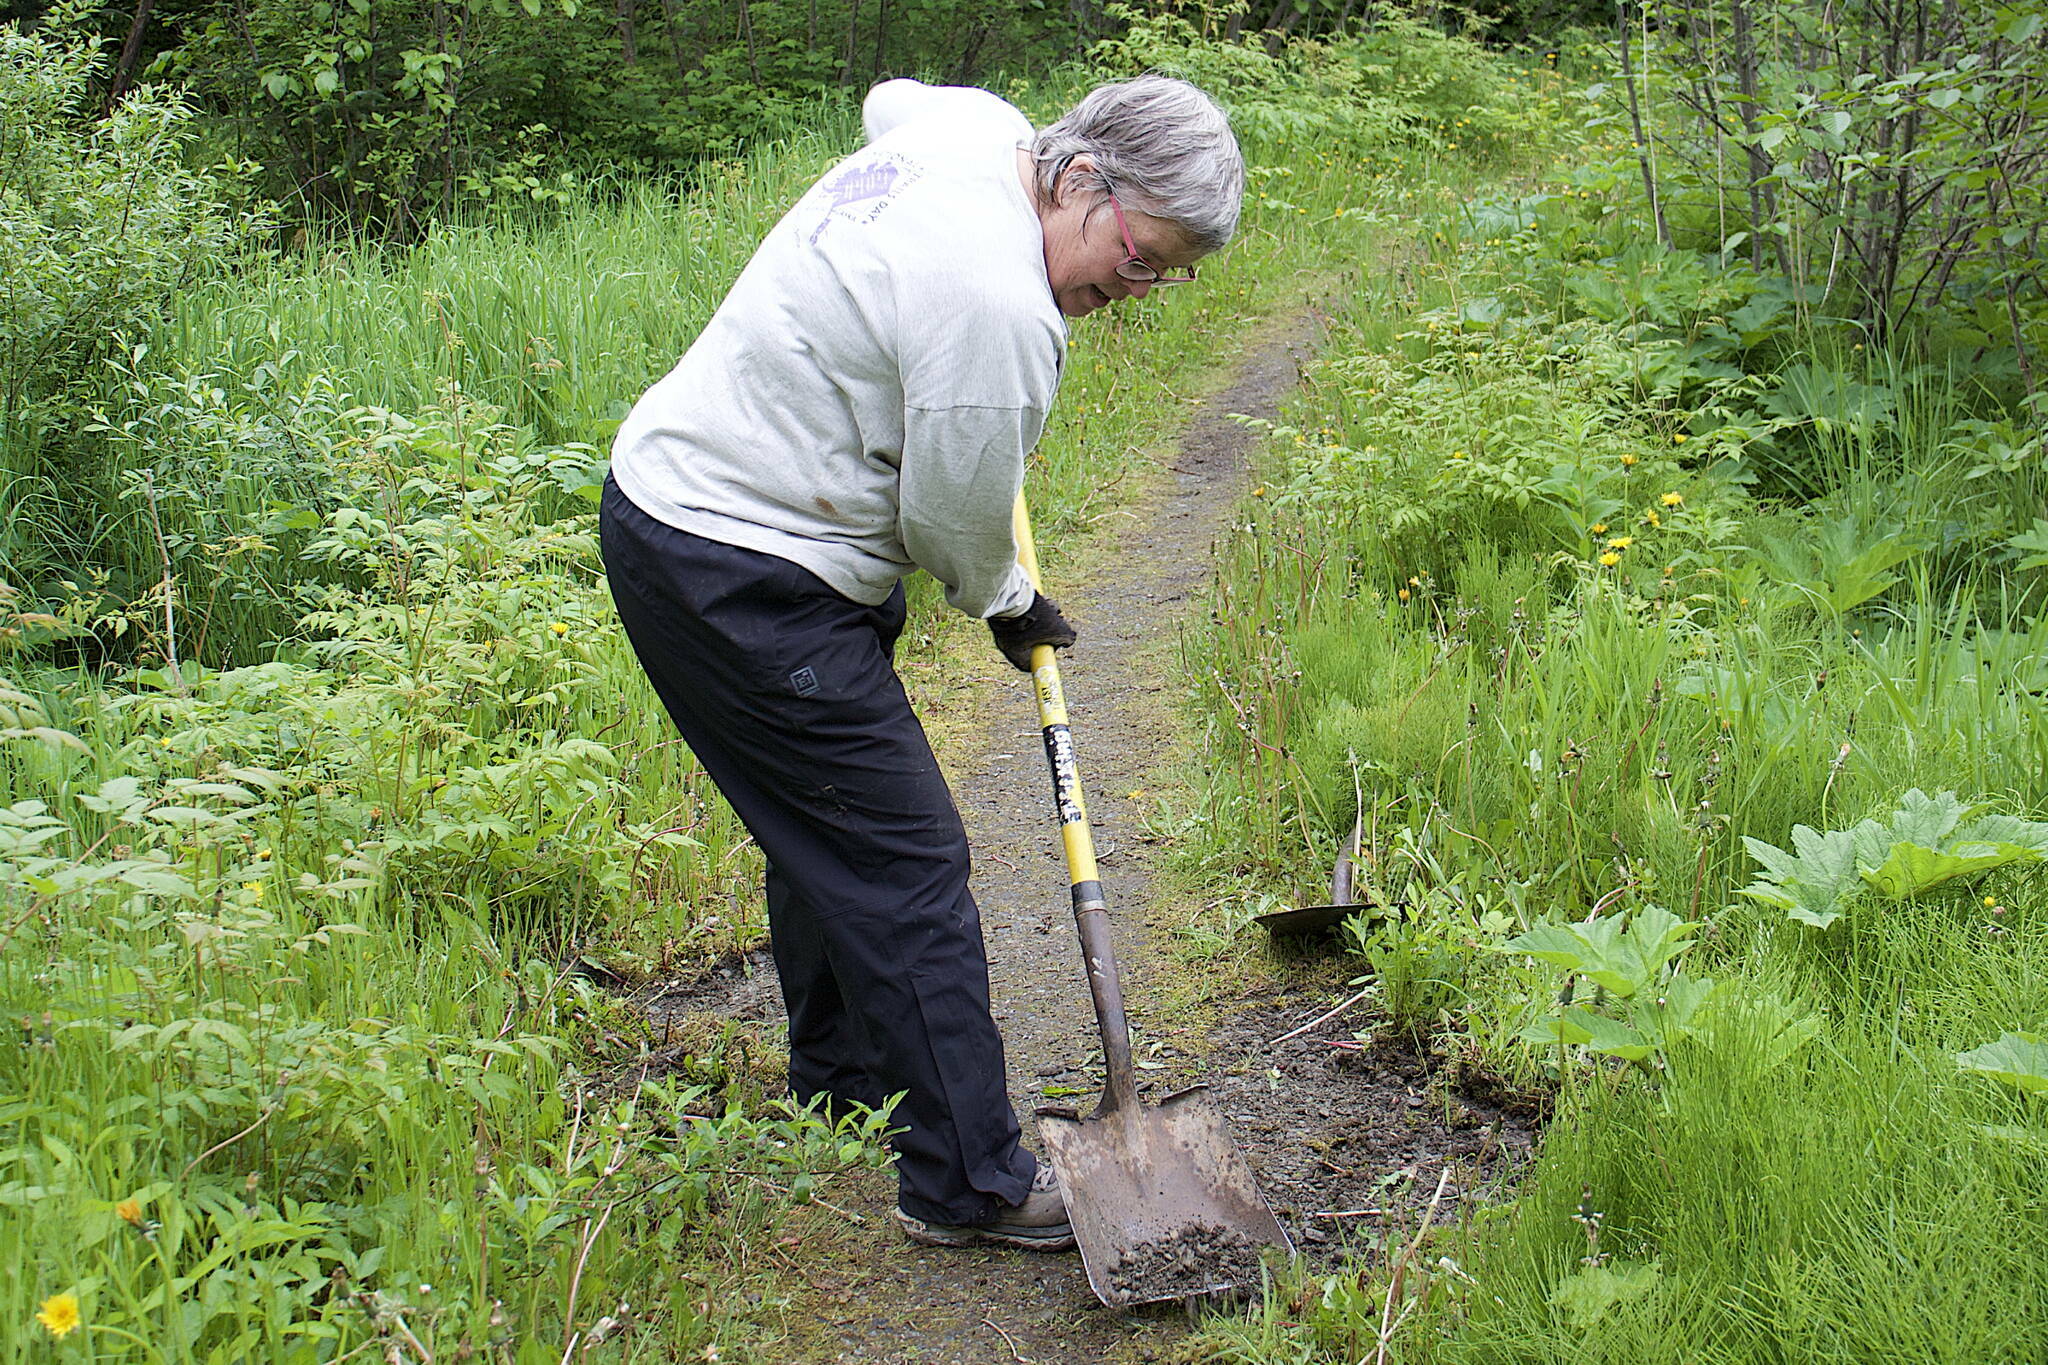 Kim Kiefer, a former city manager and Parks and Director for the City and Borough of Juneau, uses a shovel to clear vegetation from the Kingfisher Pond Loop Trail on Saturday, June 3, 2023. (Mark Sabatini / Juneau Empire file photo)